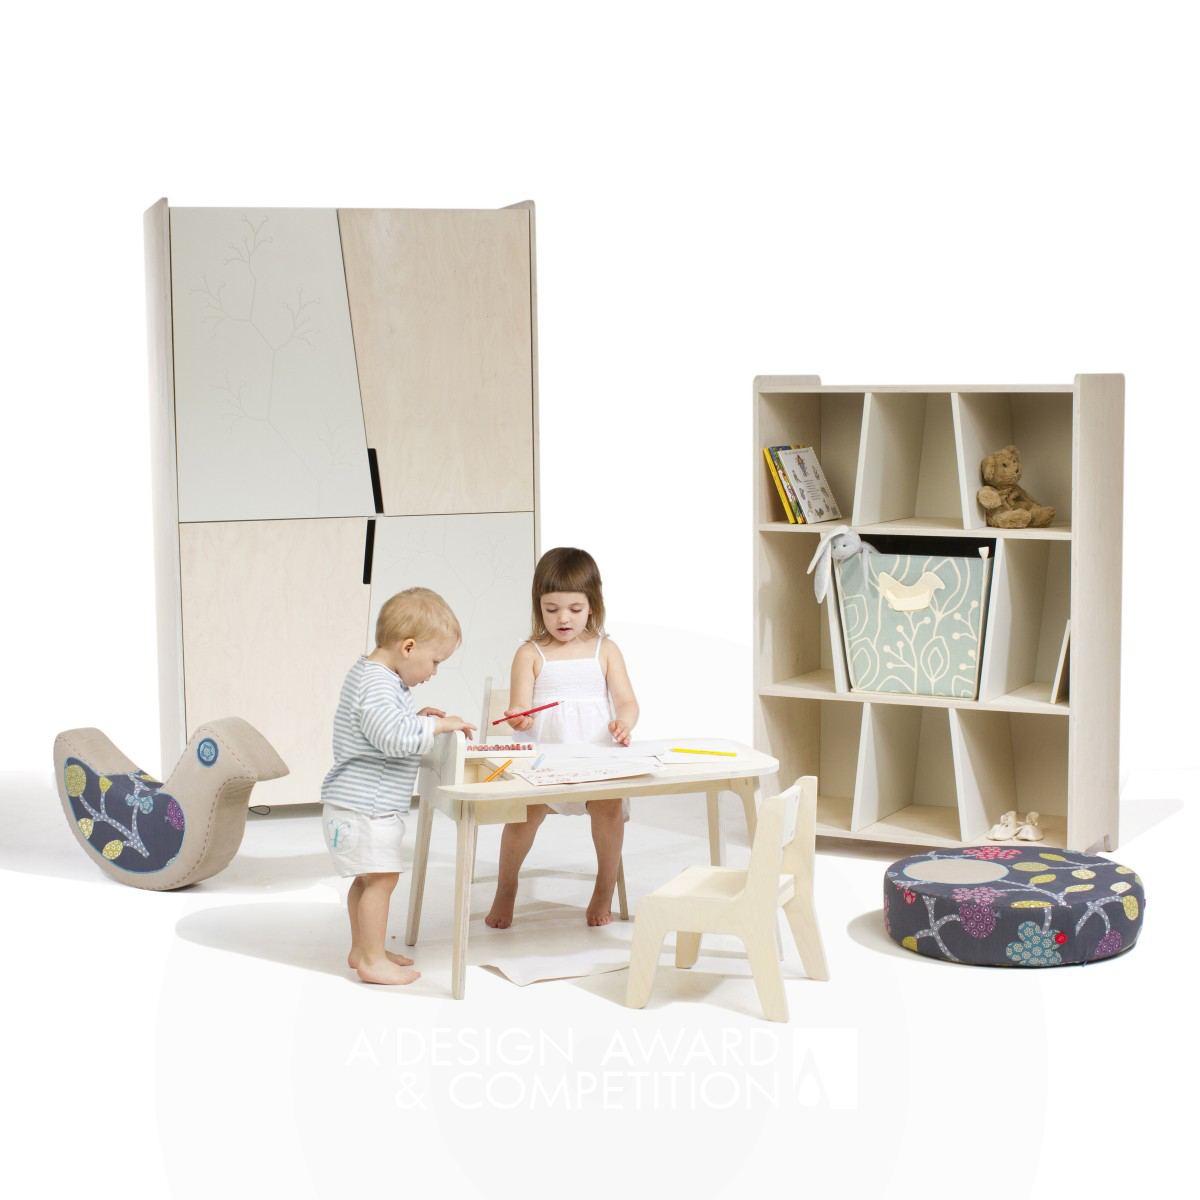 bird&berry collection baby furniture by Aija Priede-Sietina and Daneks Sietins